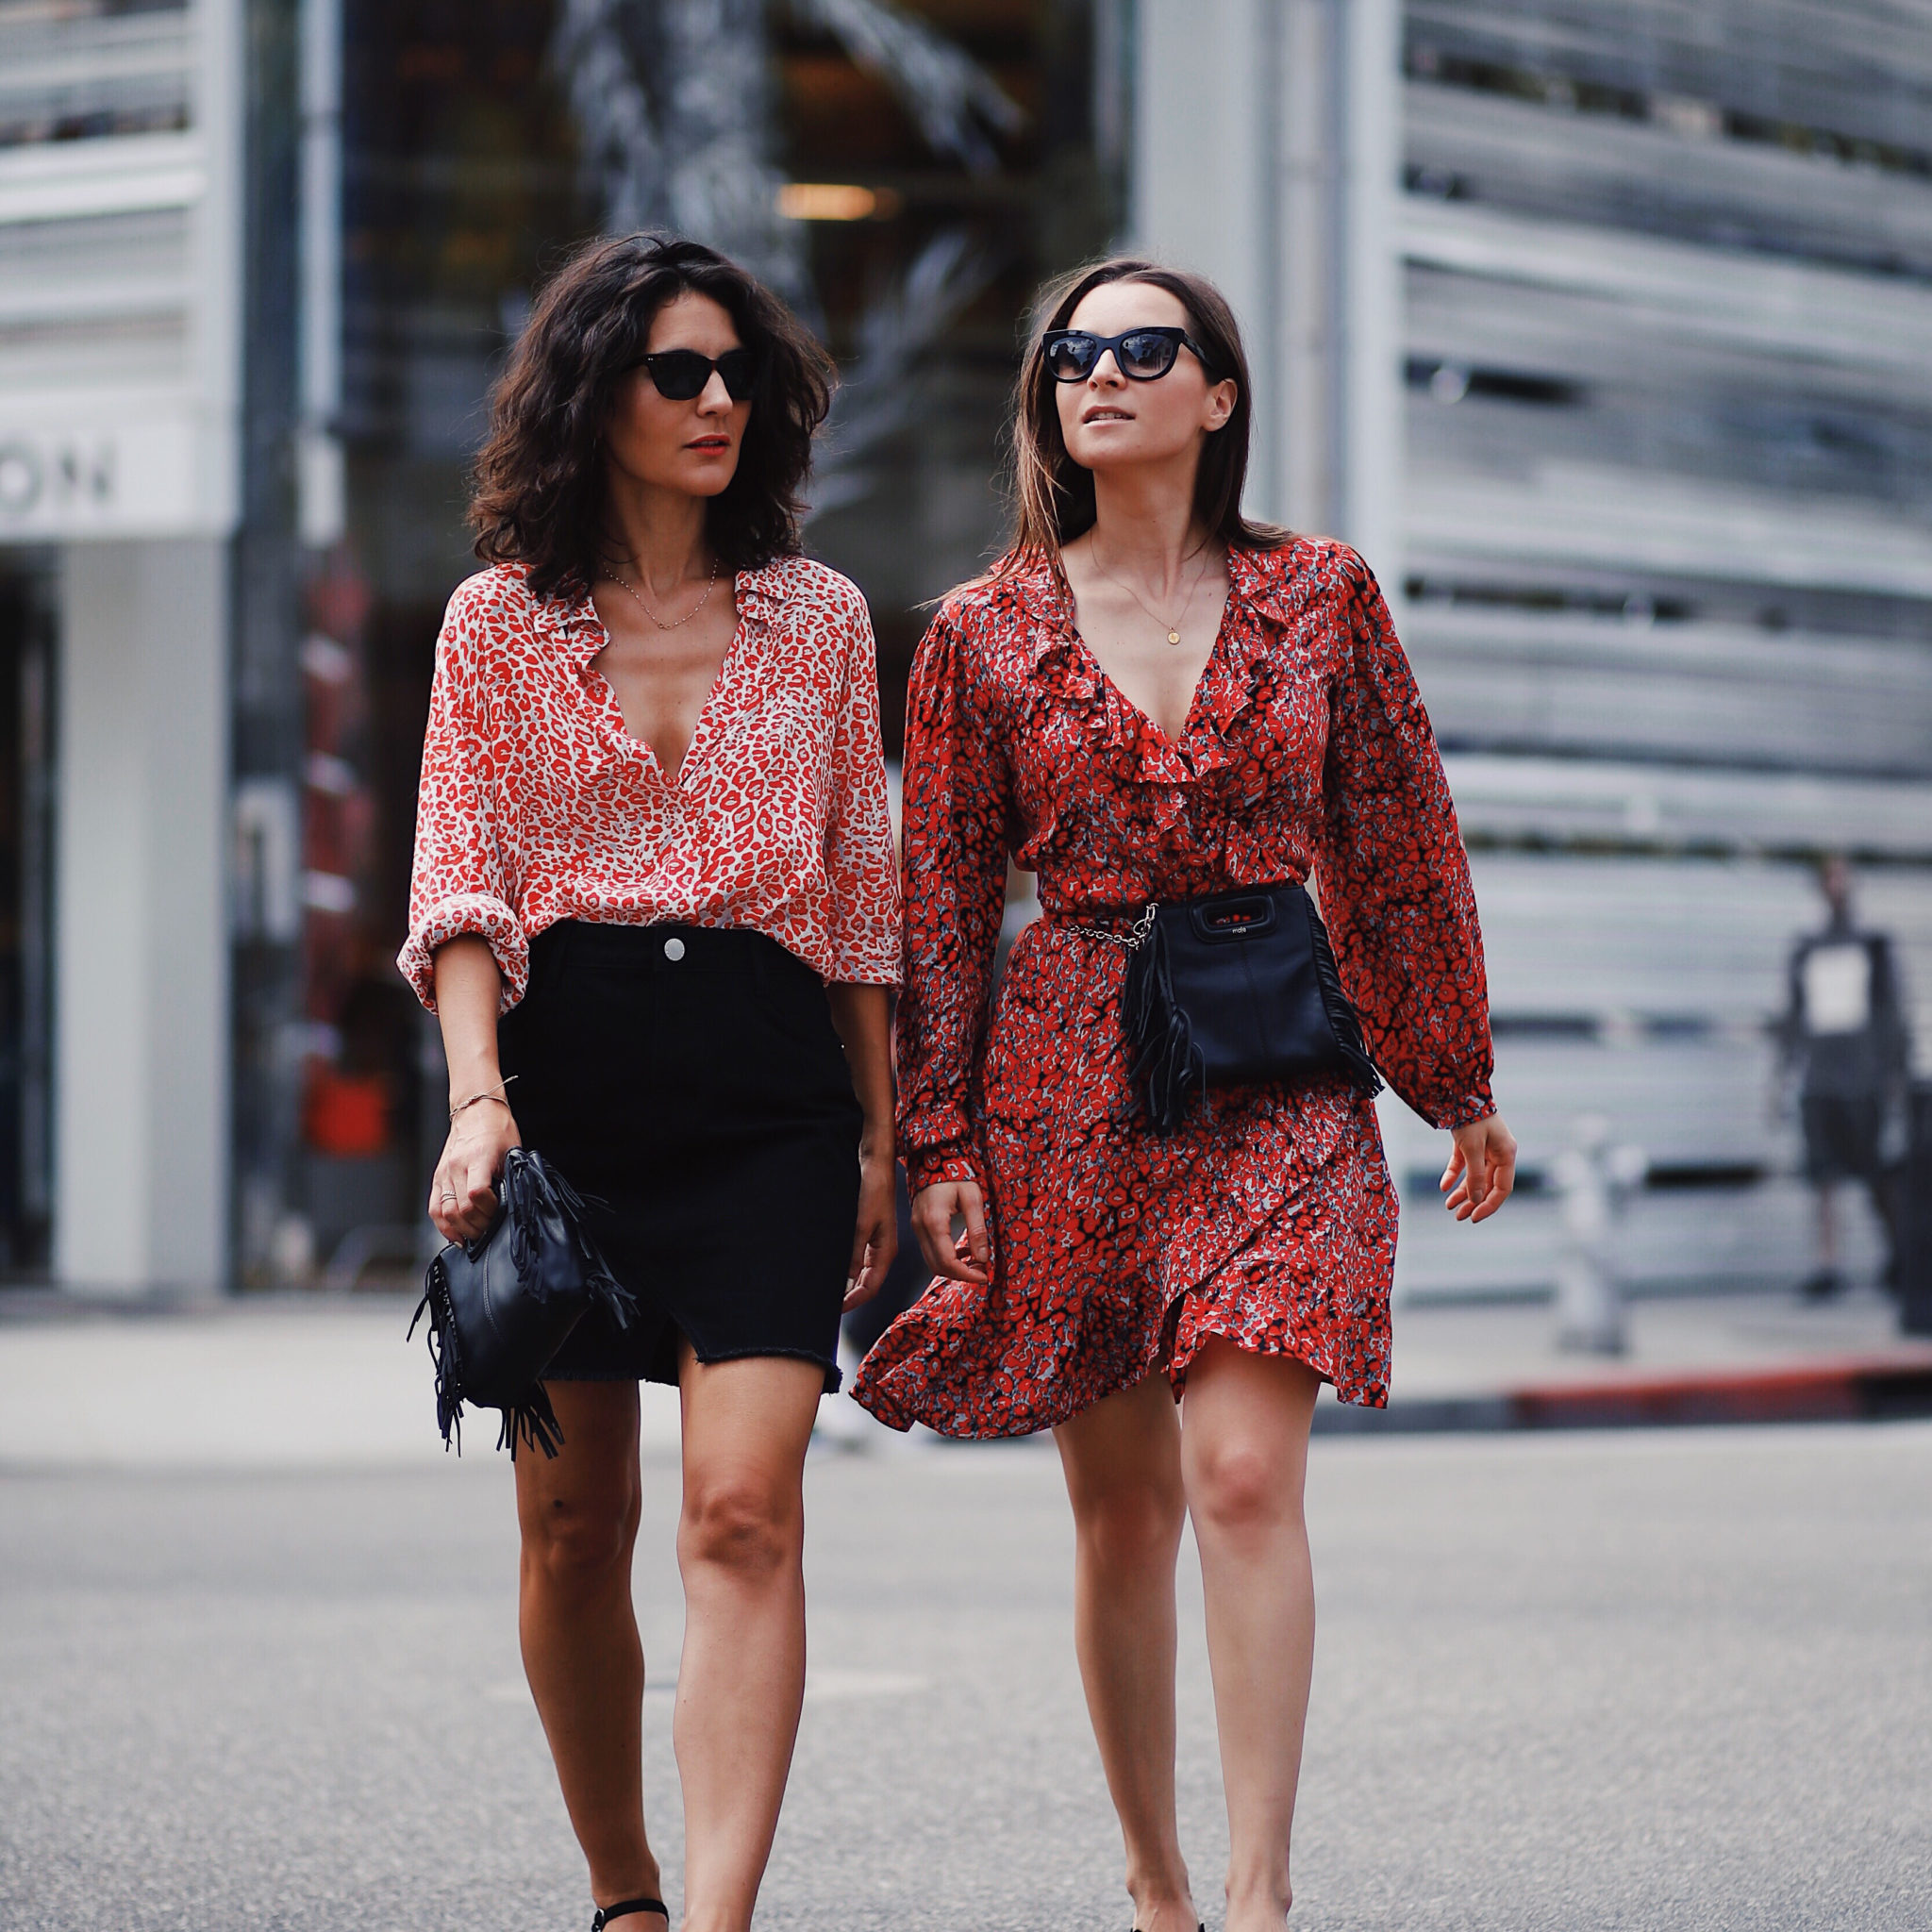 French Fashion Bloggers Julia Comil and Laura Albouy wearing the Maje Pre Fall Collection 2018 for the Maje Shopping Party in Beverly Drive - Trend: Leopard Print Dress Maje Mini M Bag Belt Bag - Parisian Style - French Fashion Blogger Los Angeles - Lookbook - Maje Beverly Drive